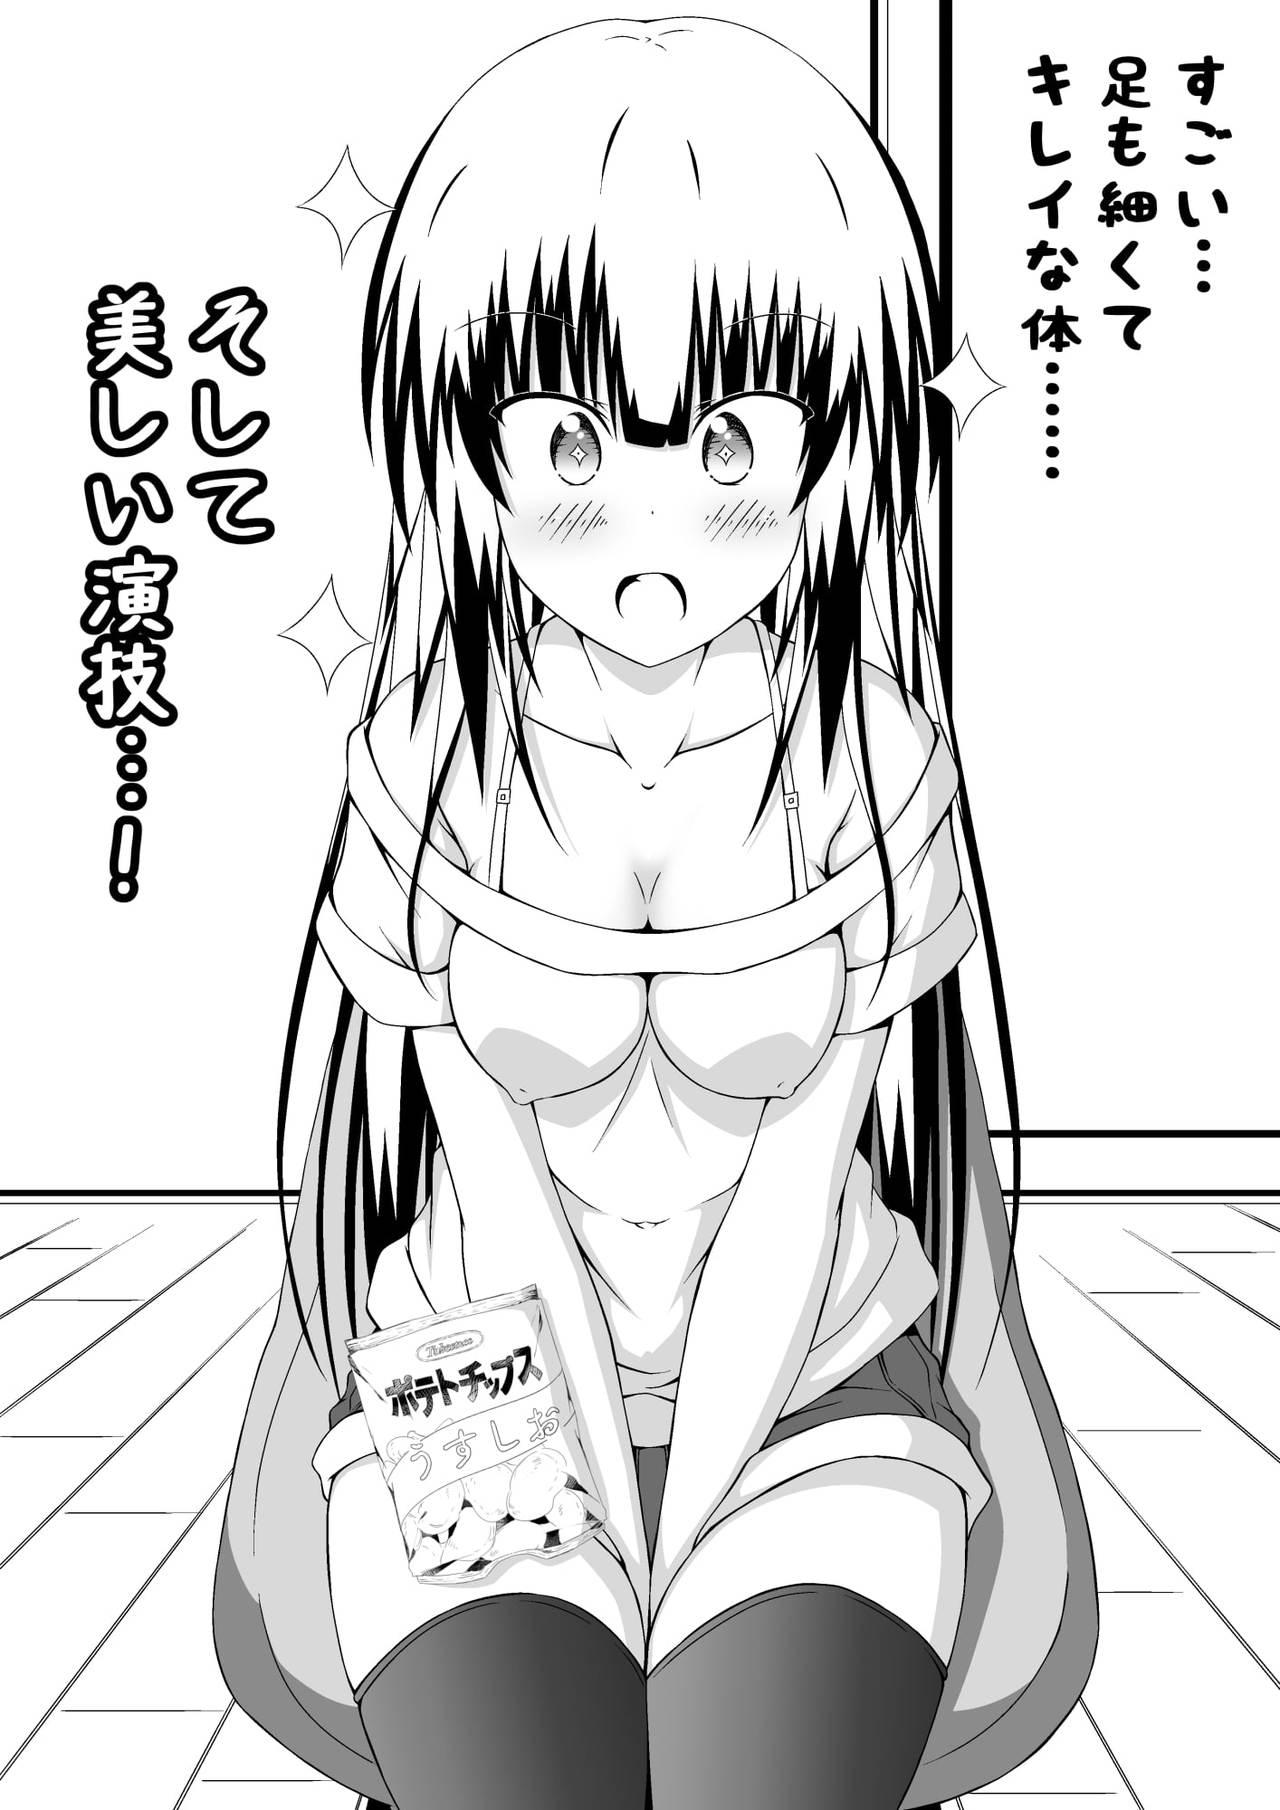 Wank Nyotaika DT to Oppai JD! 3 Shaven - Page 5